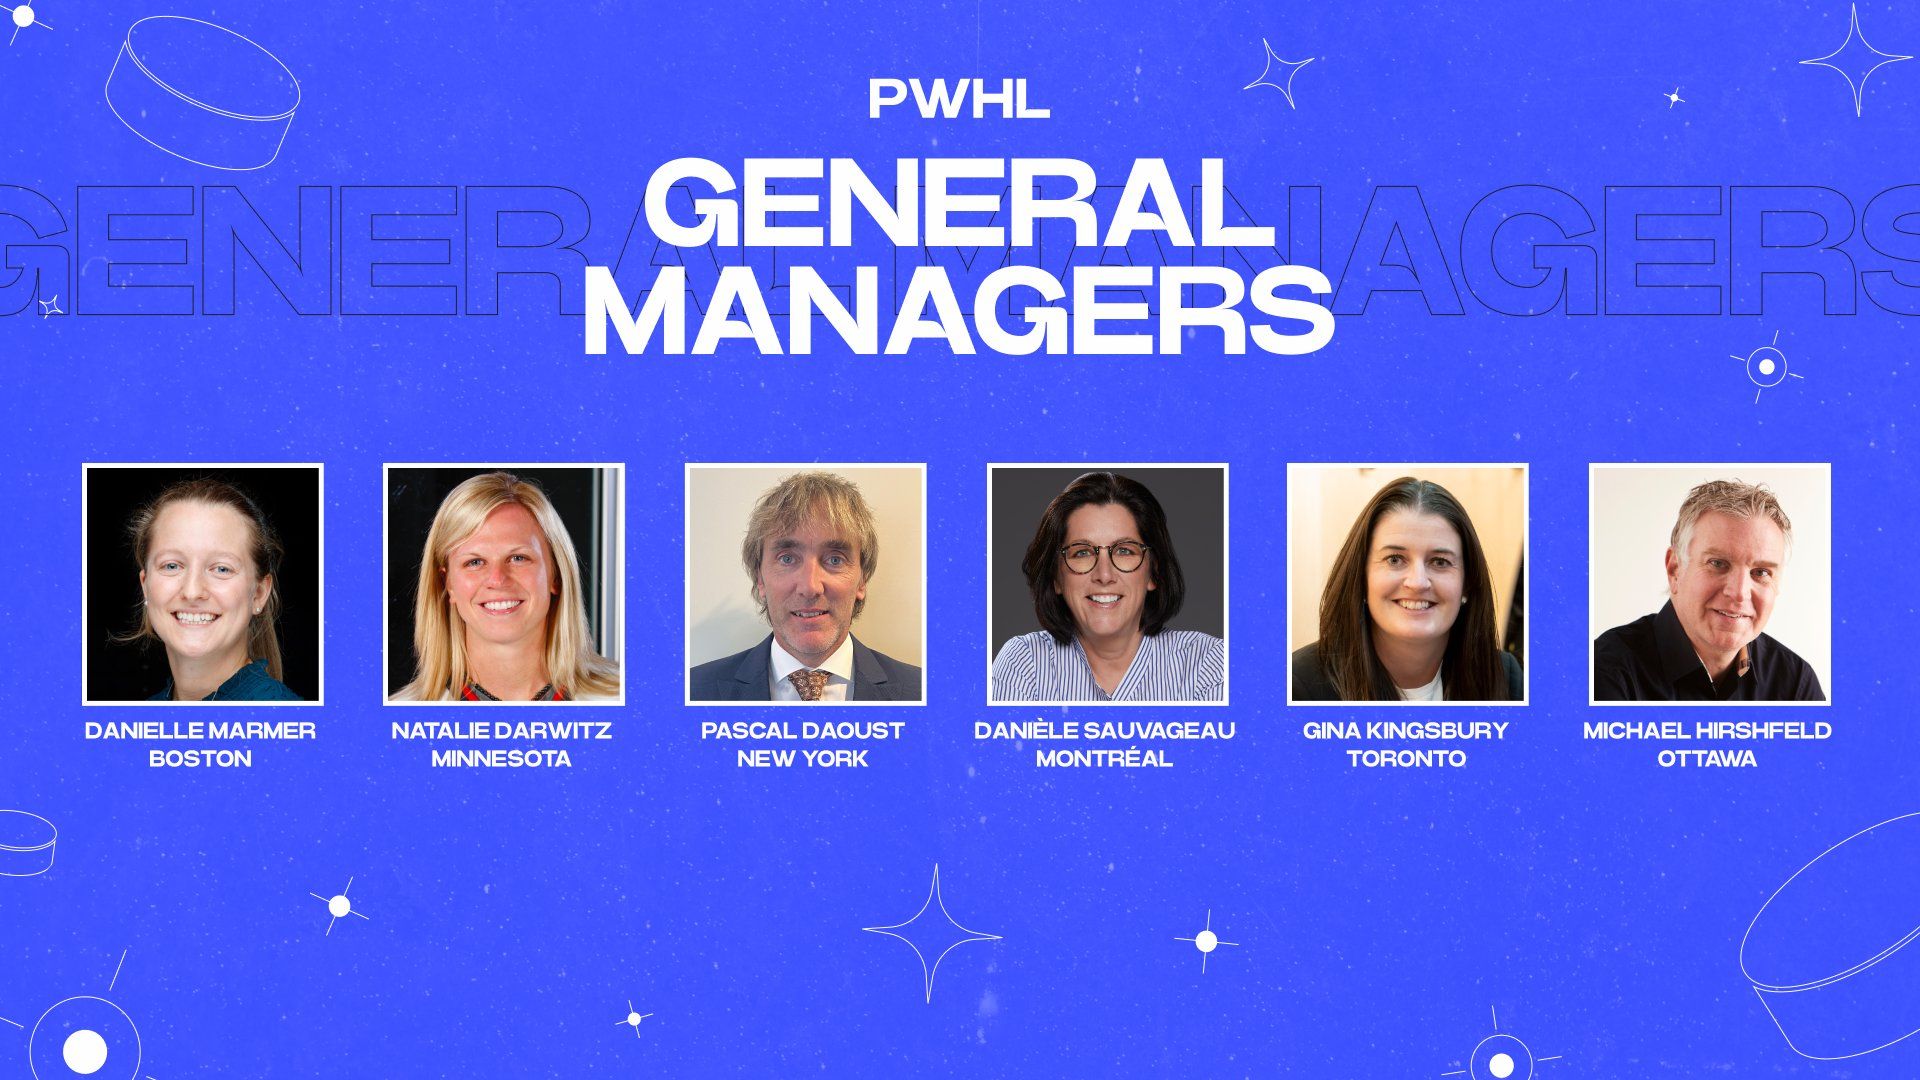 PWHL Introduces General Managers, Announces Draft Order